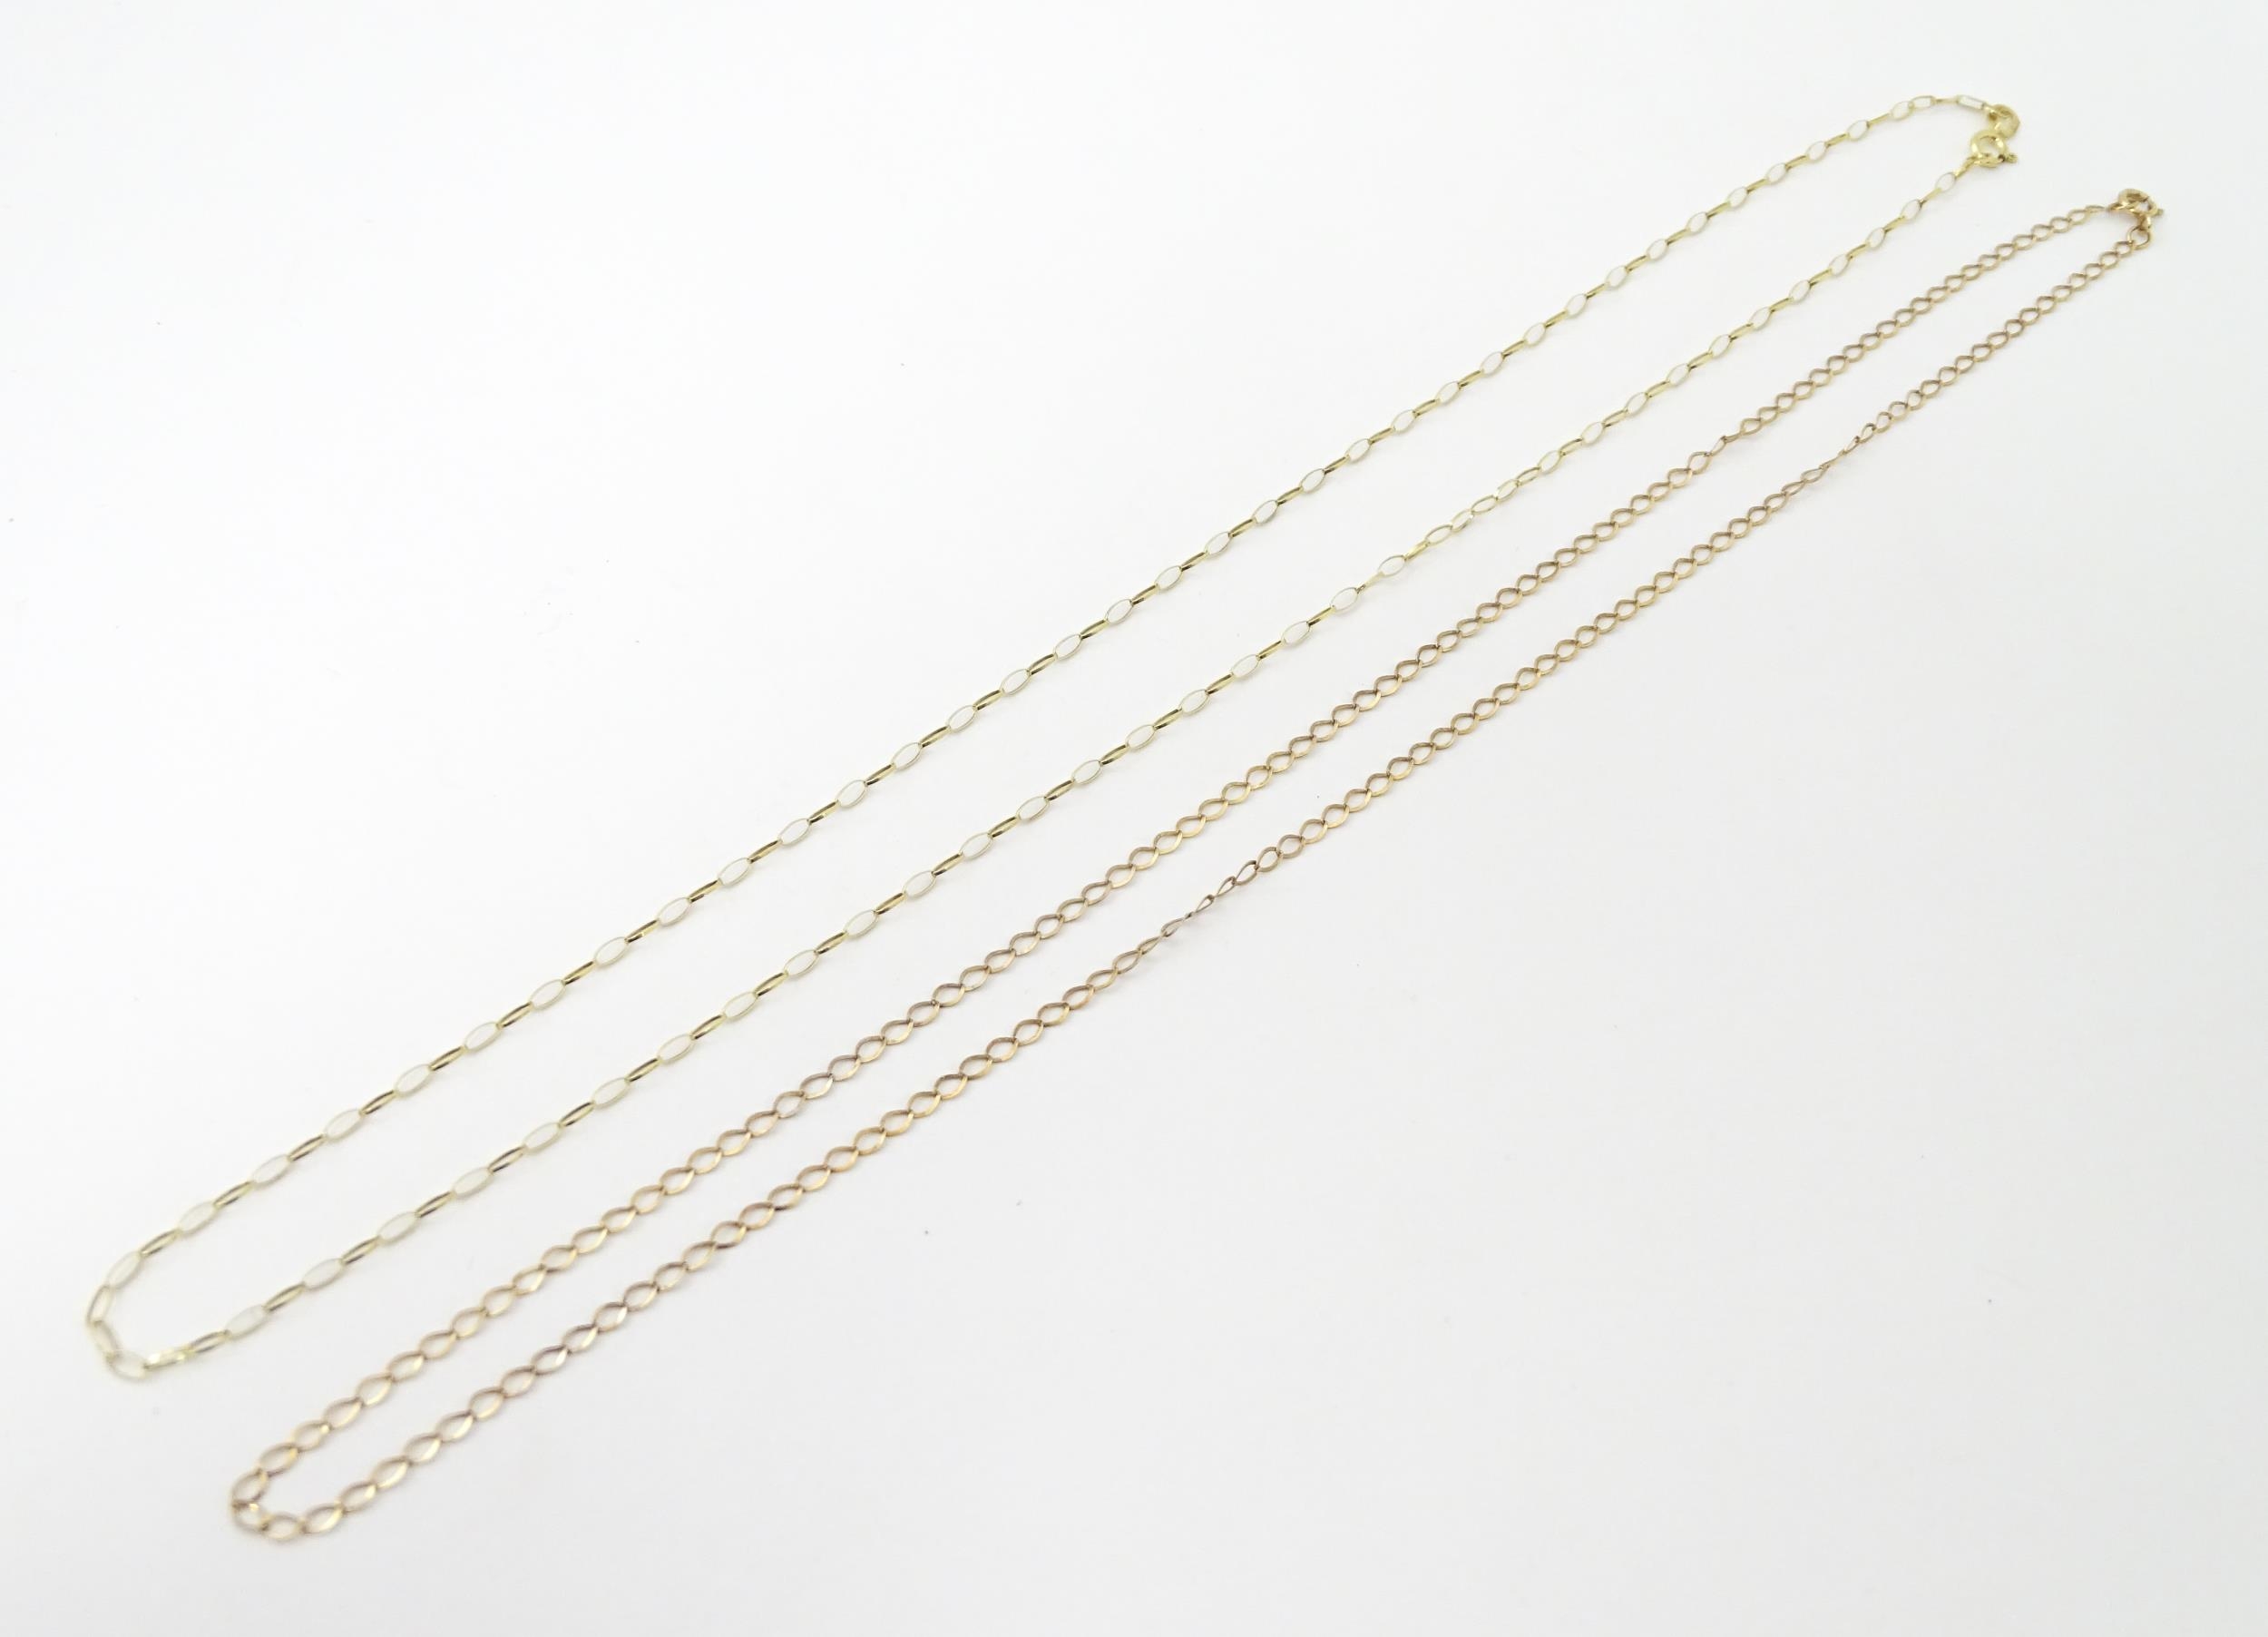 Two 9ct gold chain necklaces. Each approx. 18" long (2) Please Note - we do not make reference to